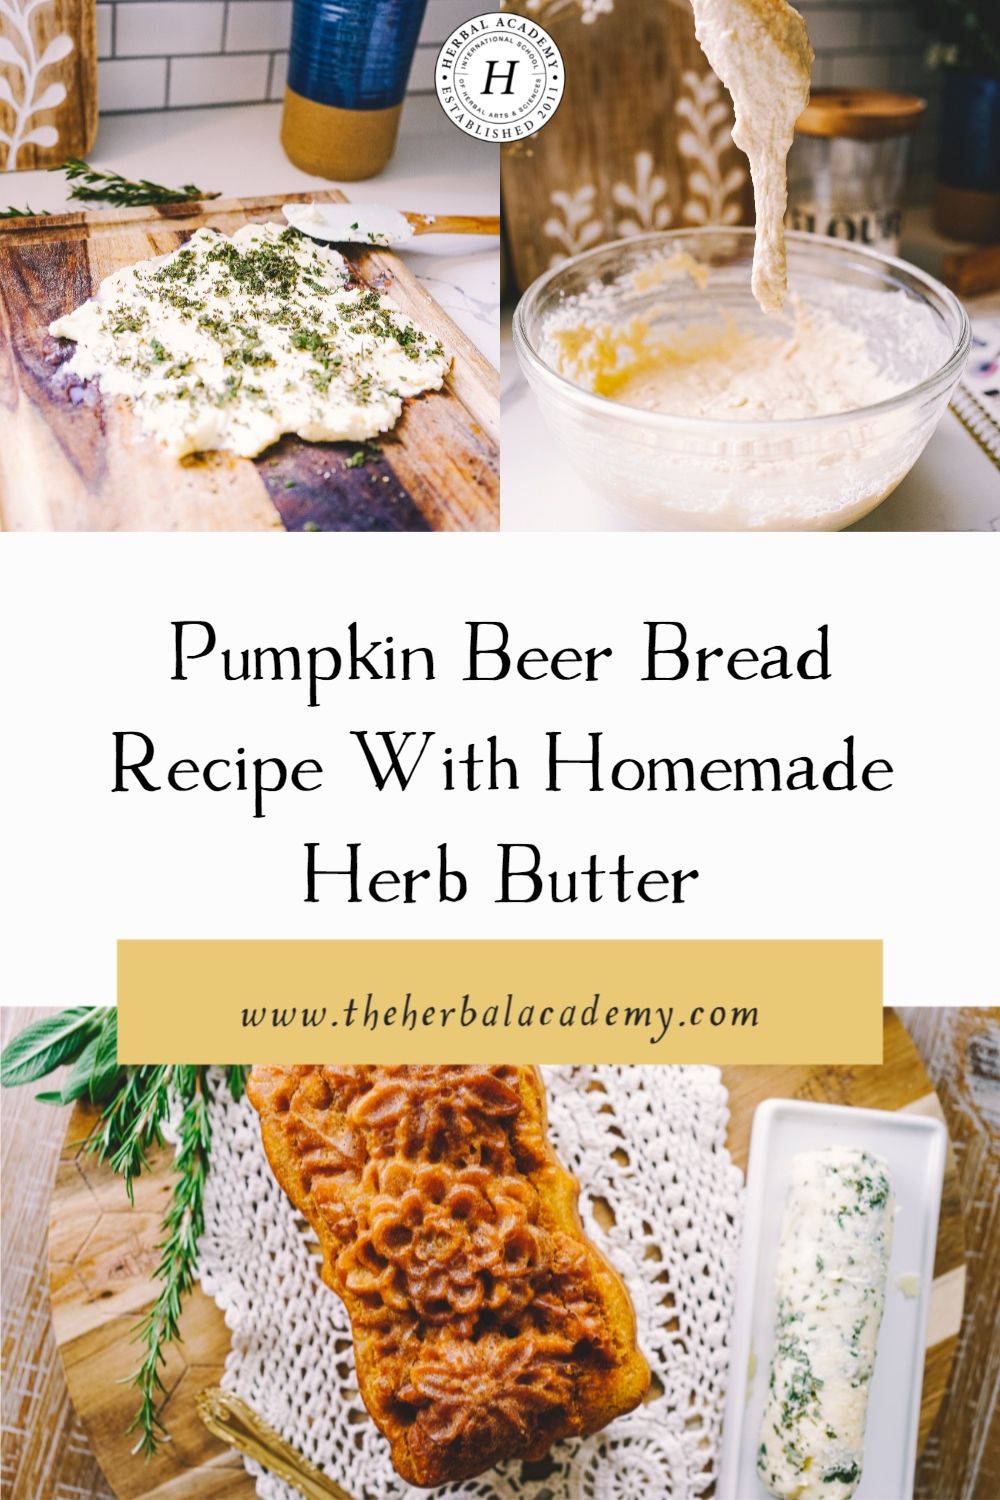 Pumpkin Beer Bread Recipe With Homemade Herb Butter | Herbal Academy | This beer bread is a nod to pumpkin season, and a savory way to create new baking traditions of your own year after year.